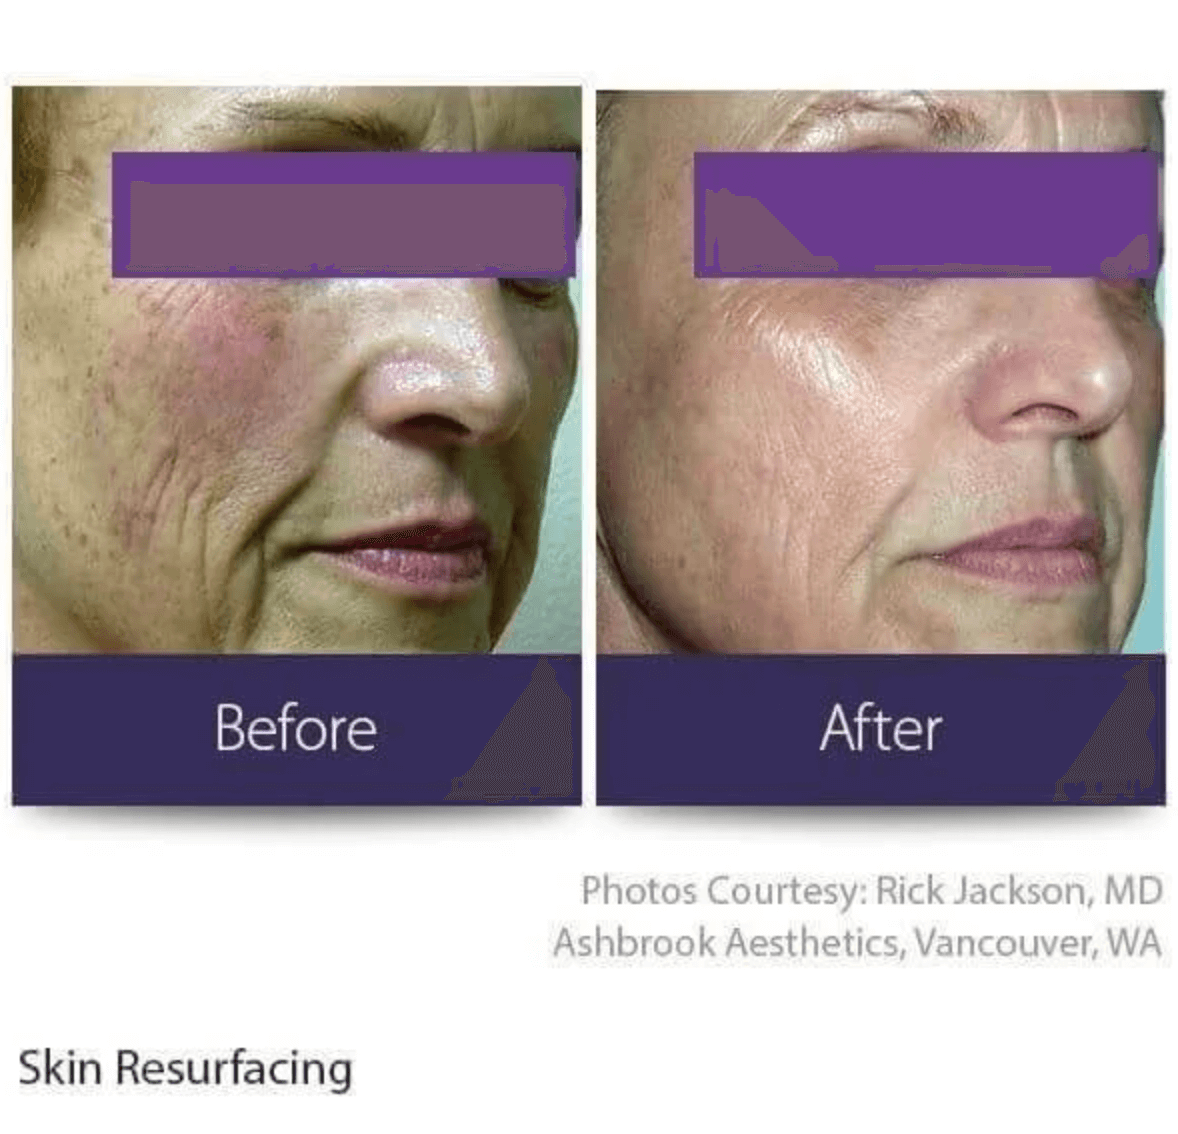 A before and after photo showing the effects of laser skin resurfacing